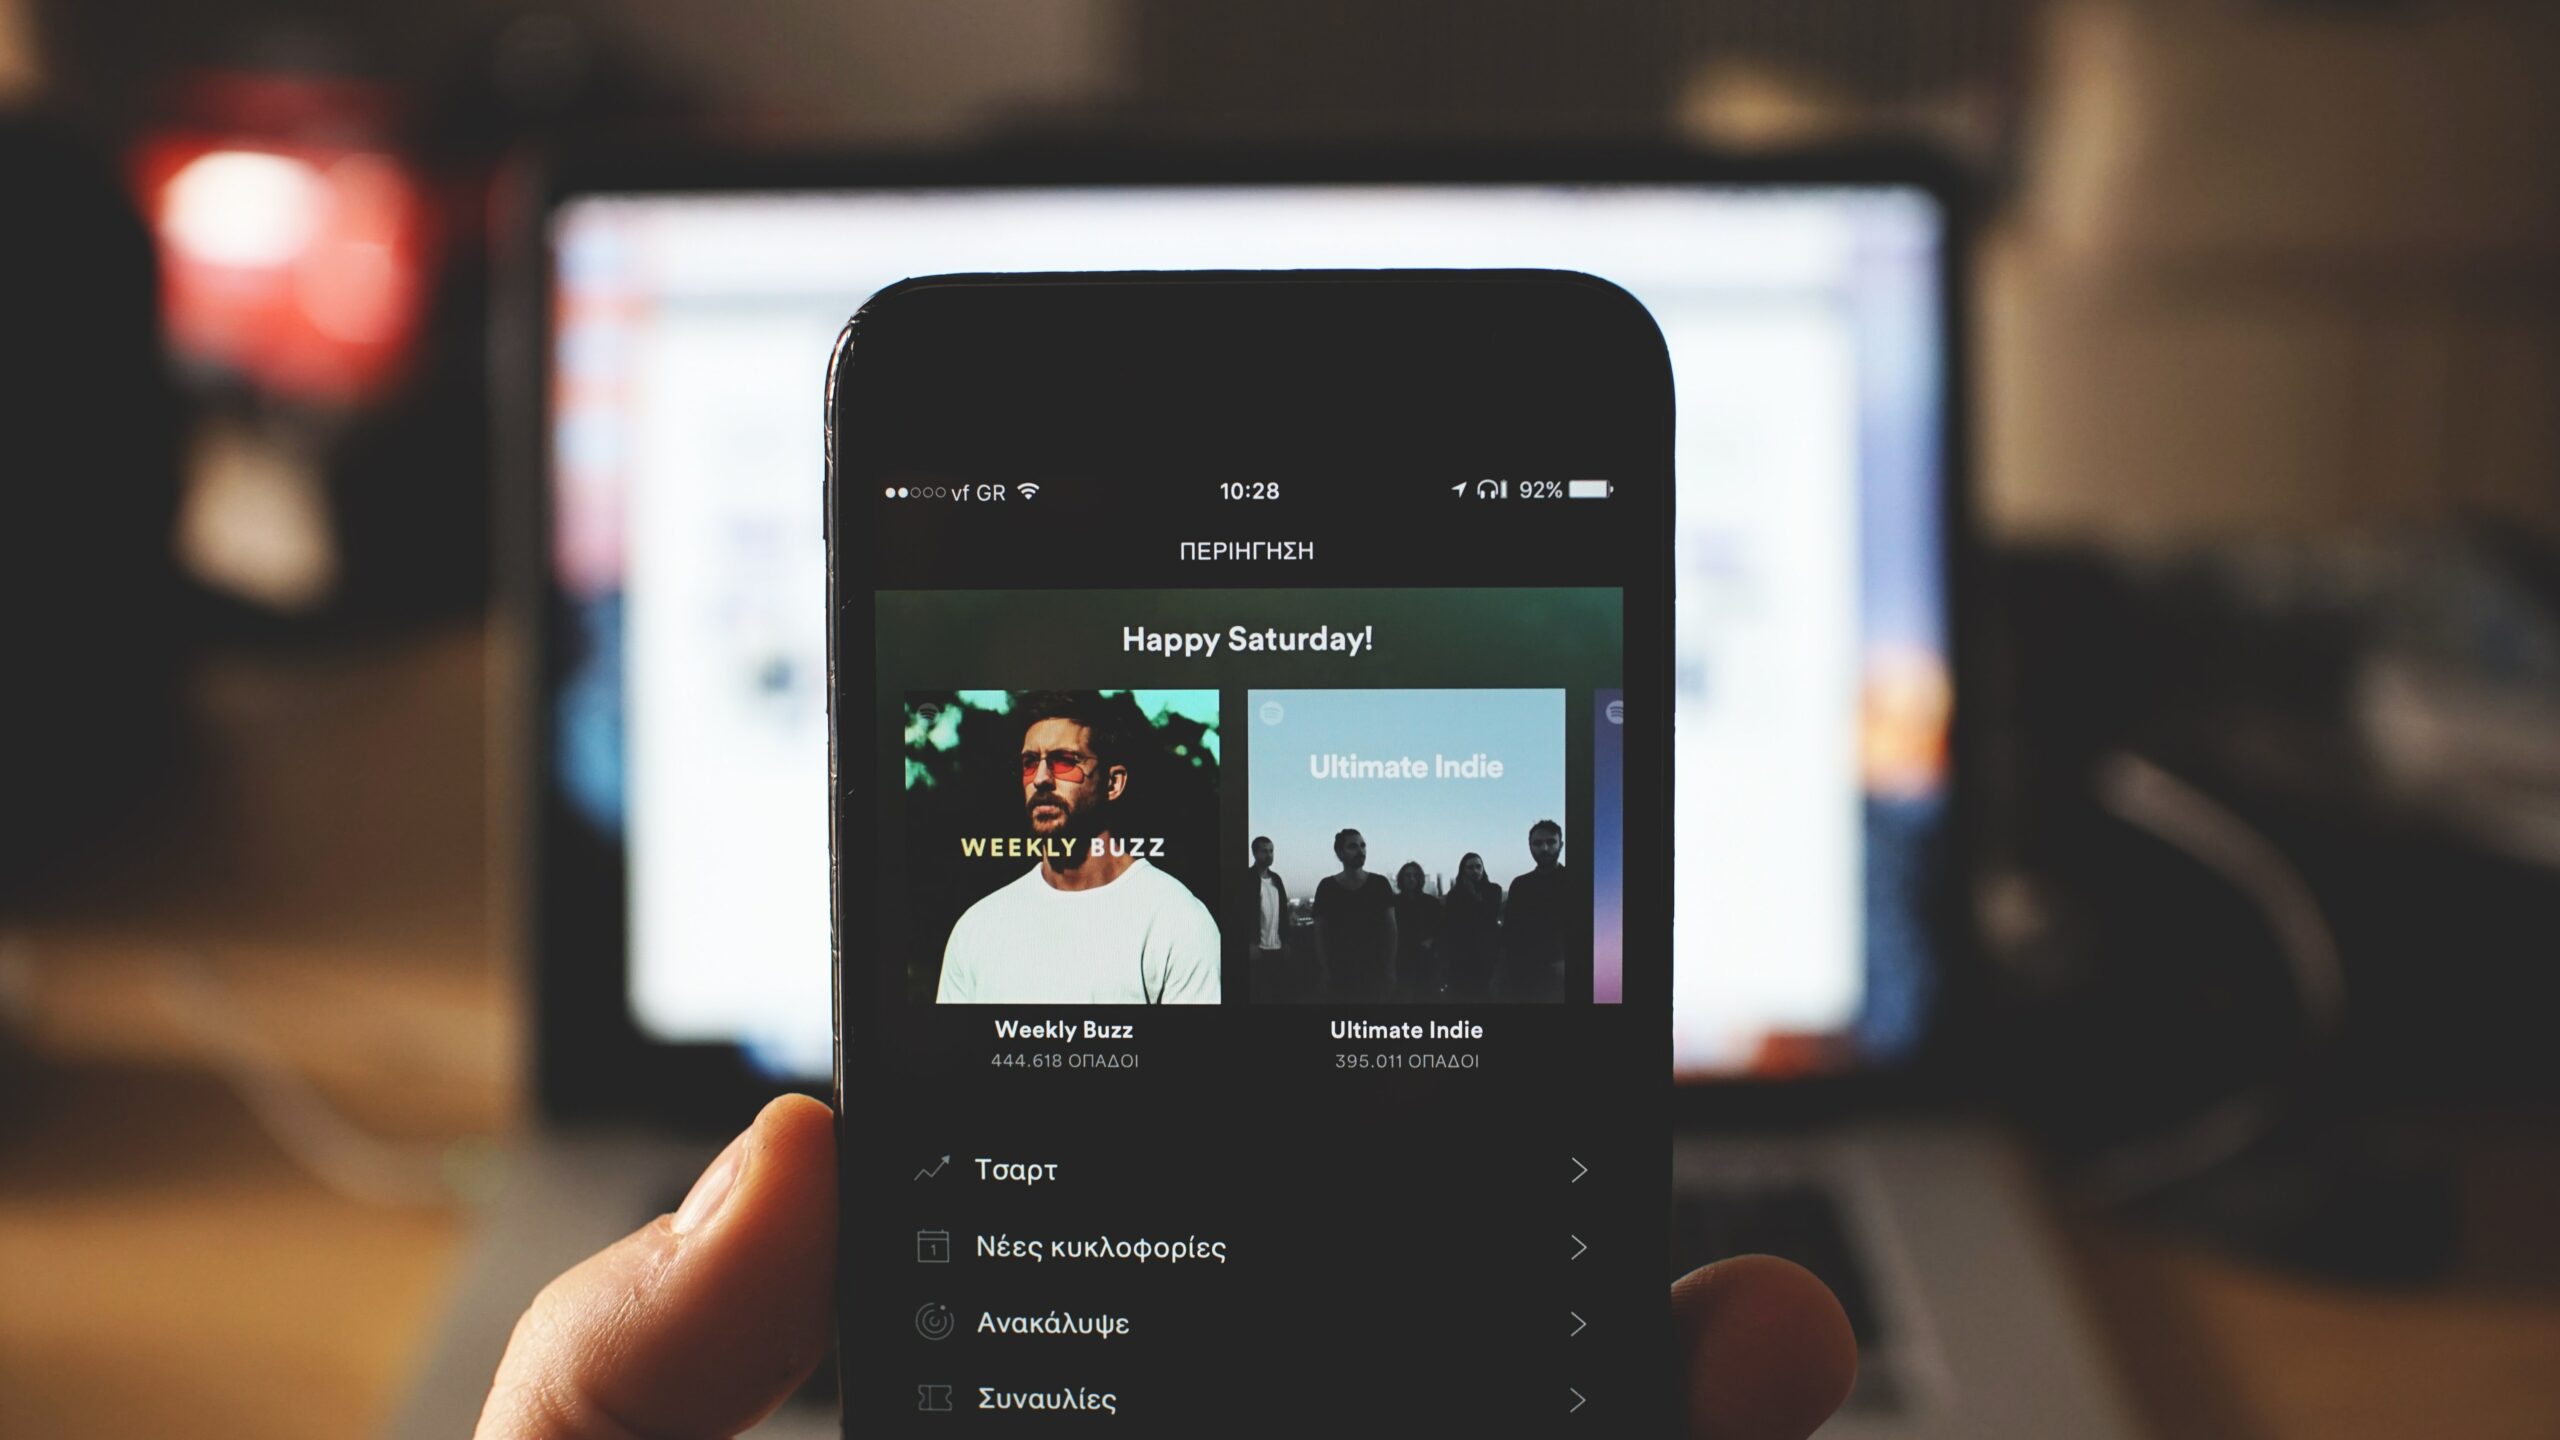 Send your song recommendations directly to friends on Spotify